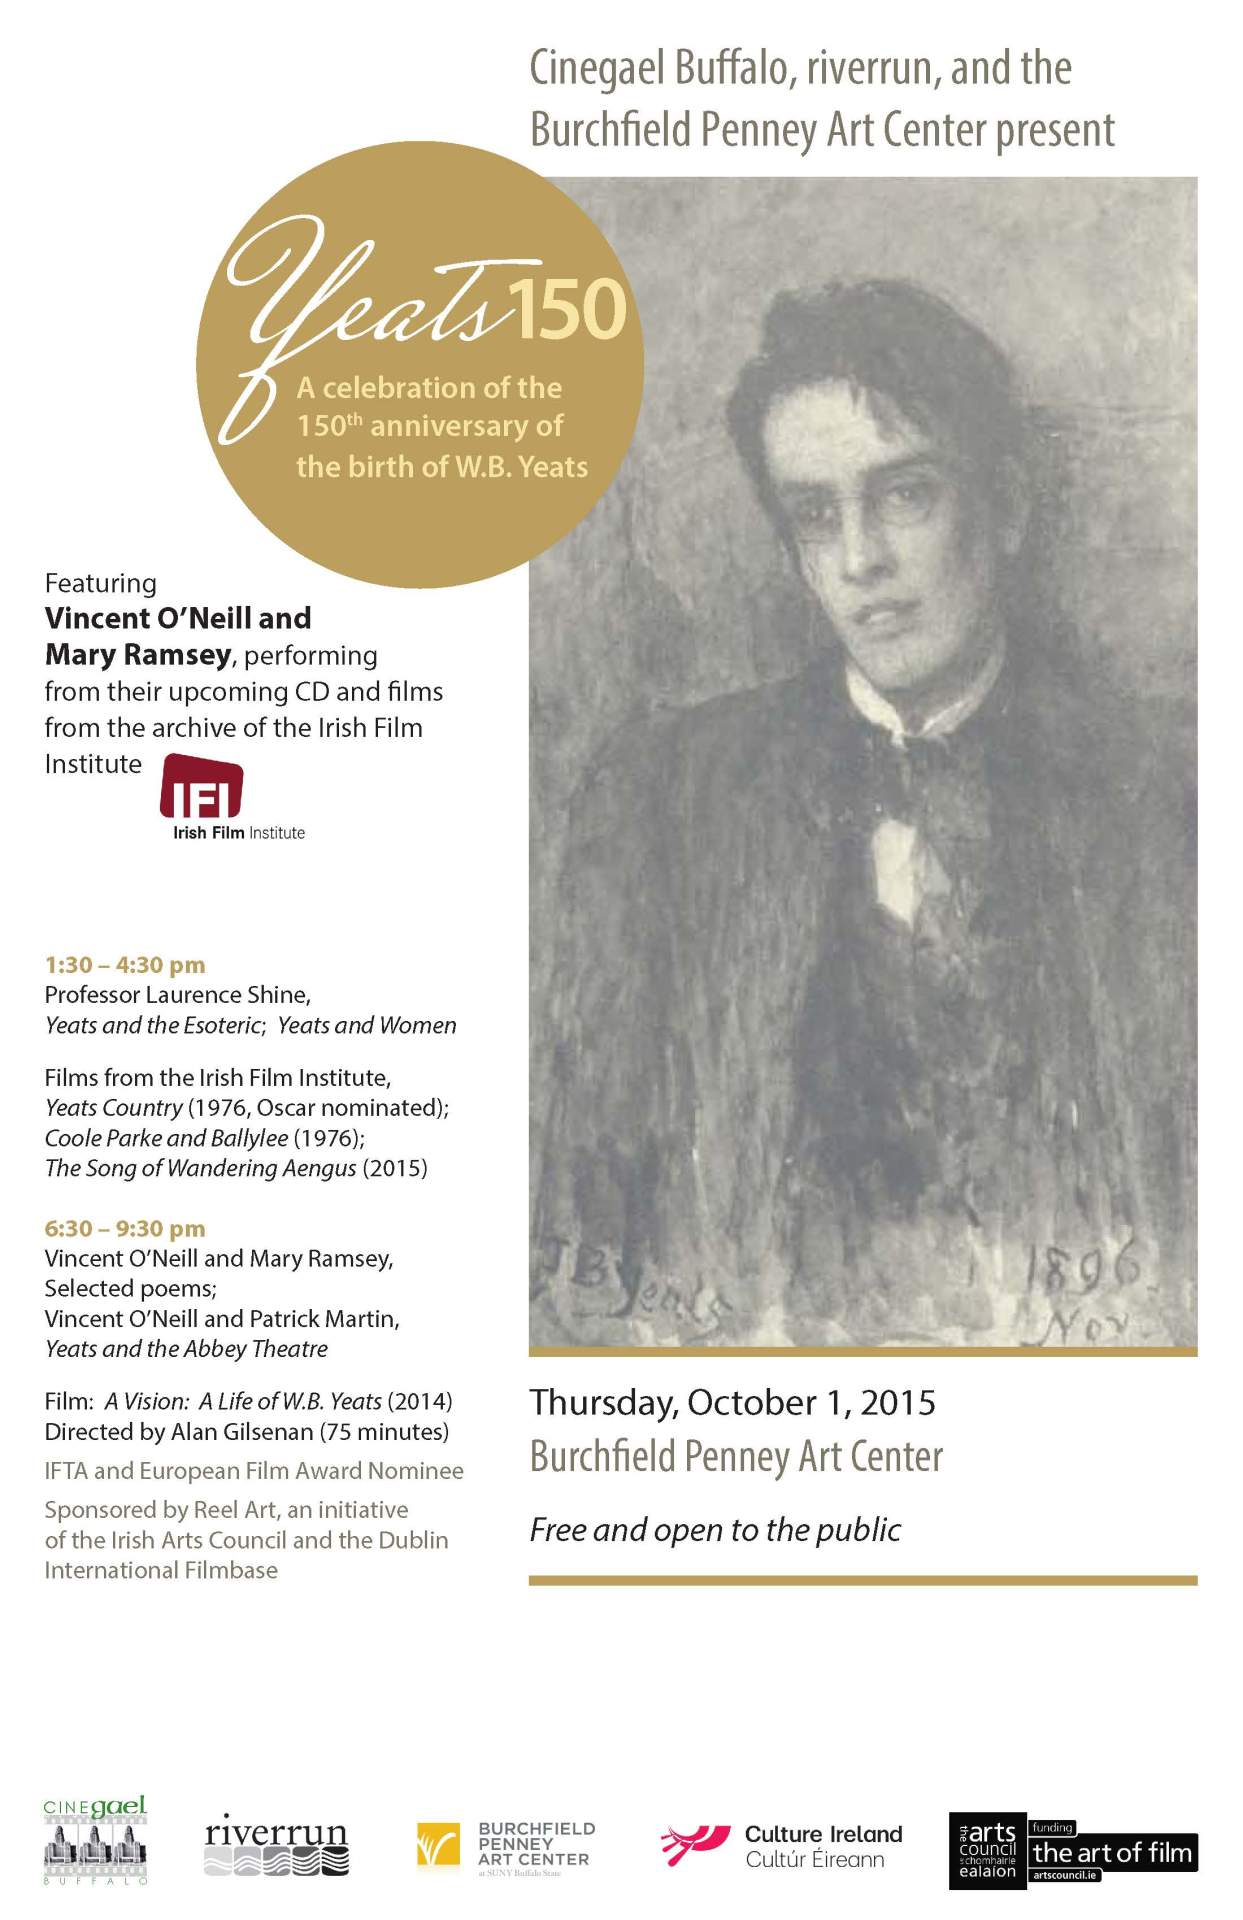 Yeats 150: A celebration of the 150th anniversary of the birth of W.B. Yeats